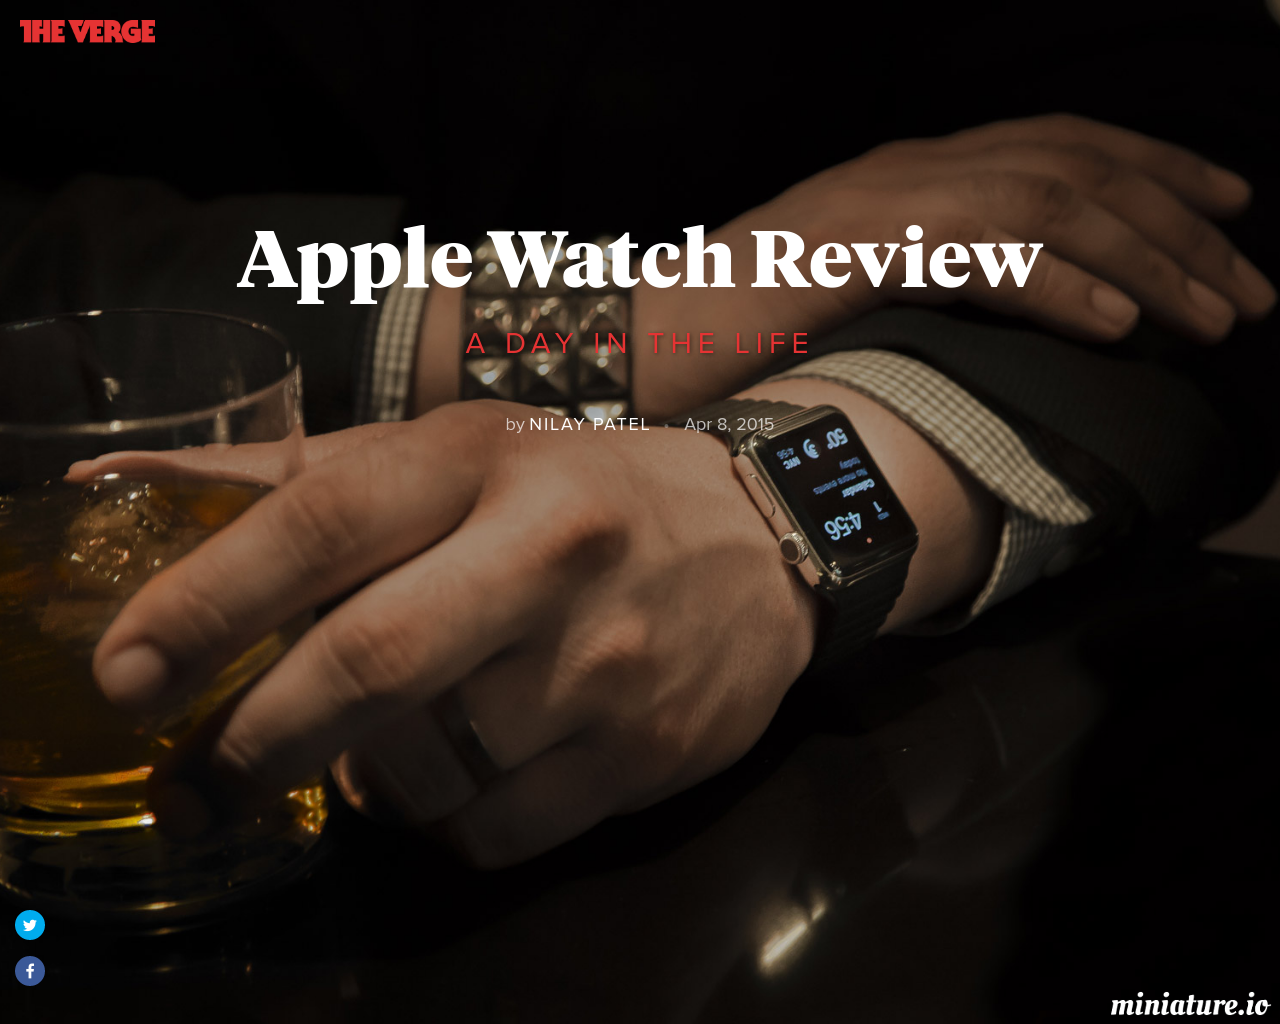 https://www.theverge.com/a/apple-watch-reviewのプレビュー画像